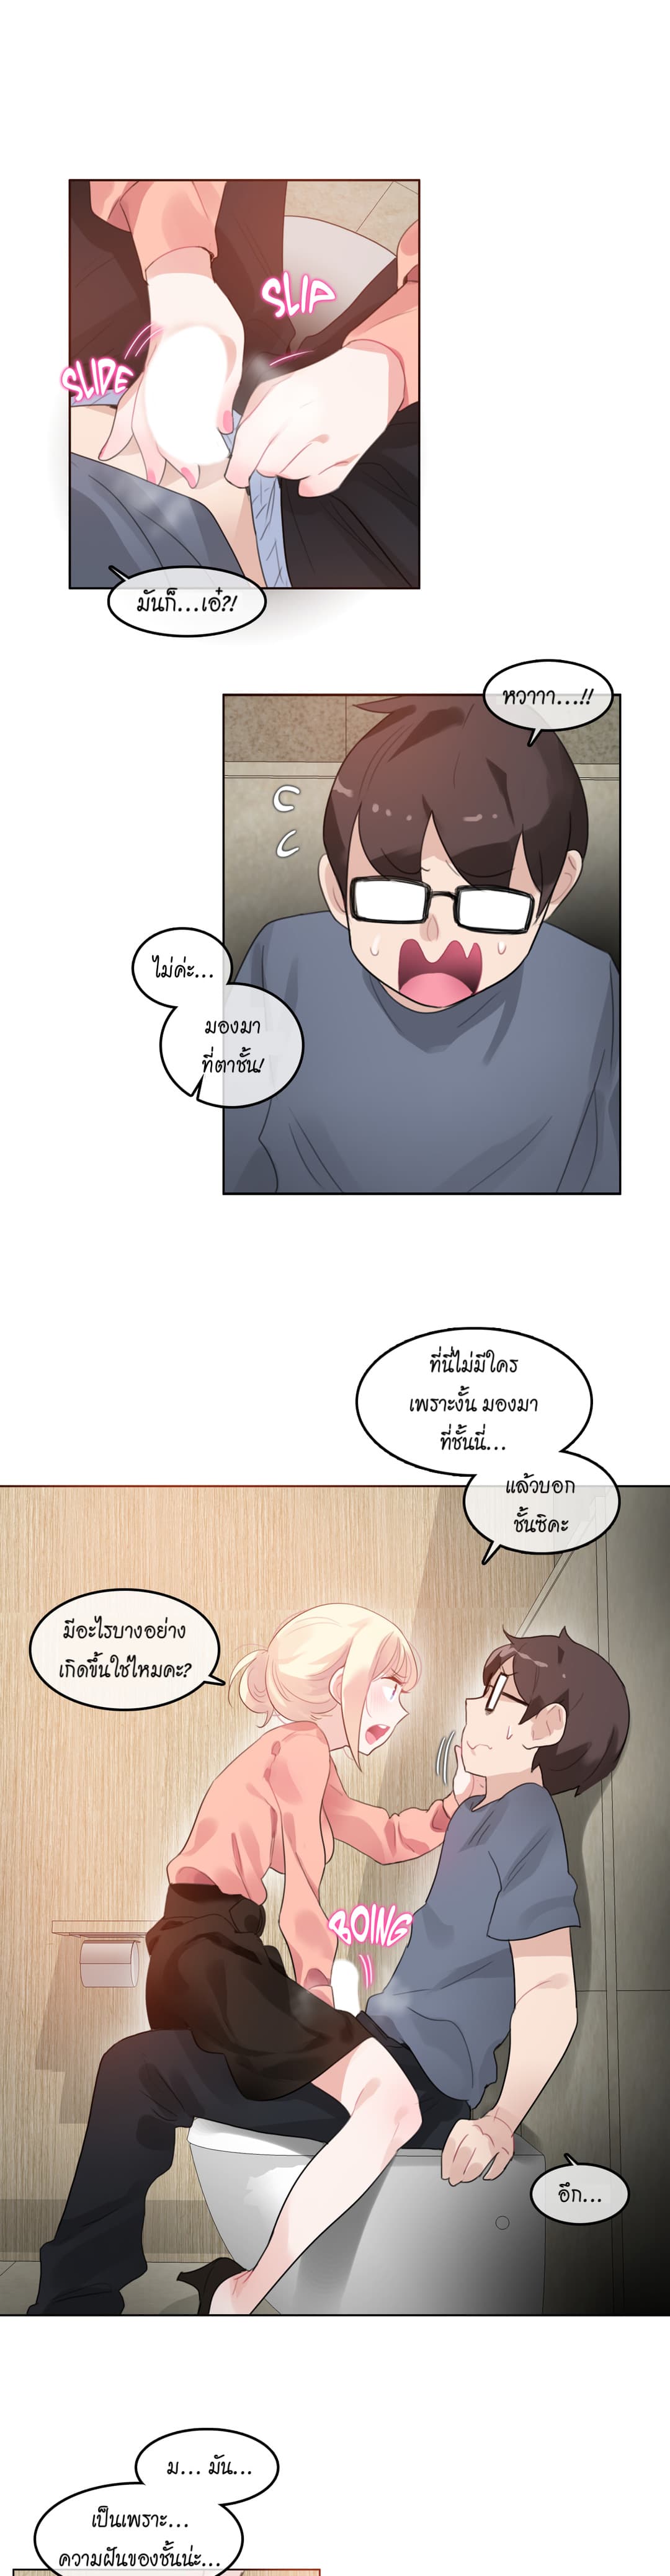 A Pervert’s Daily Life 41 (13)